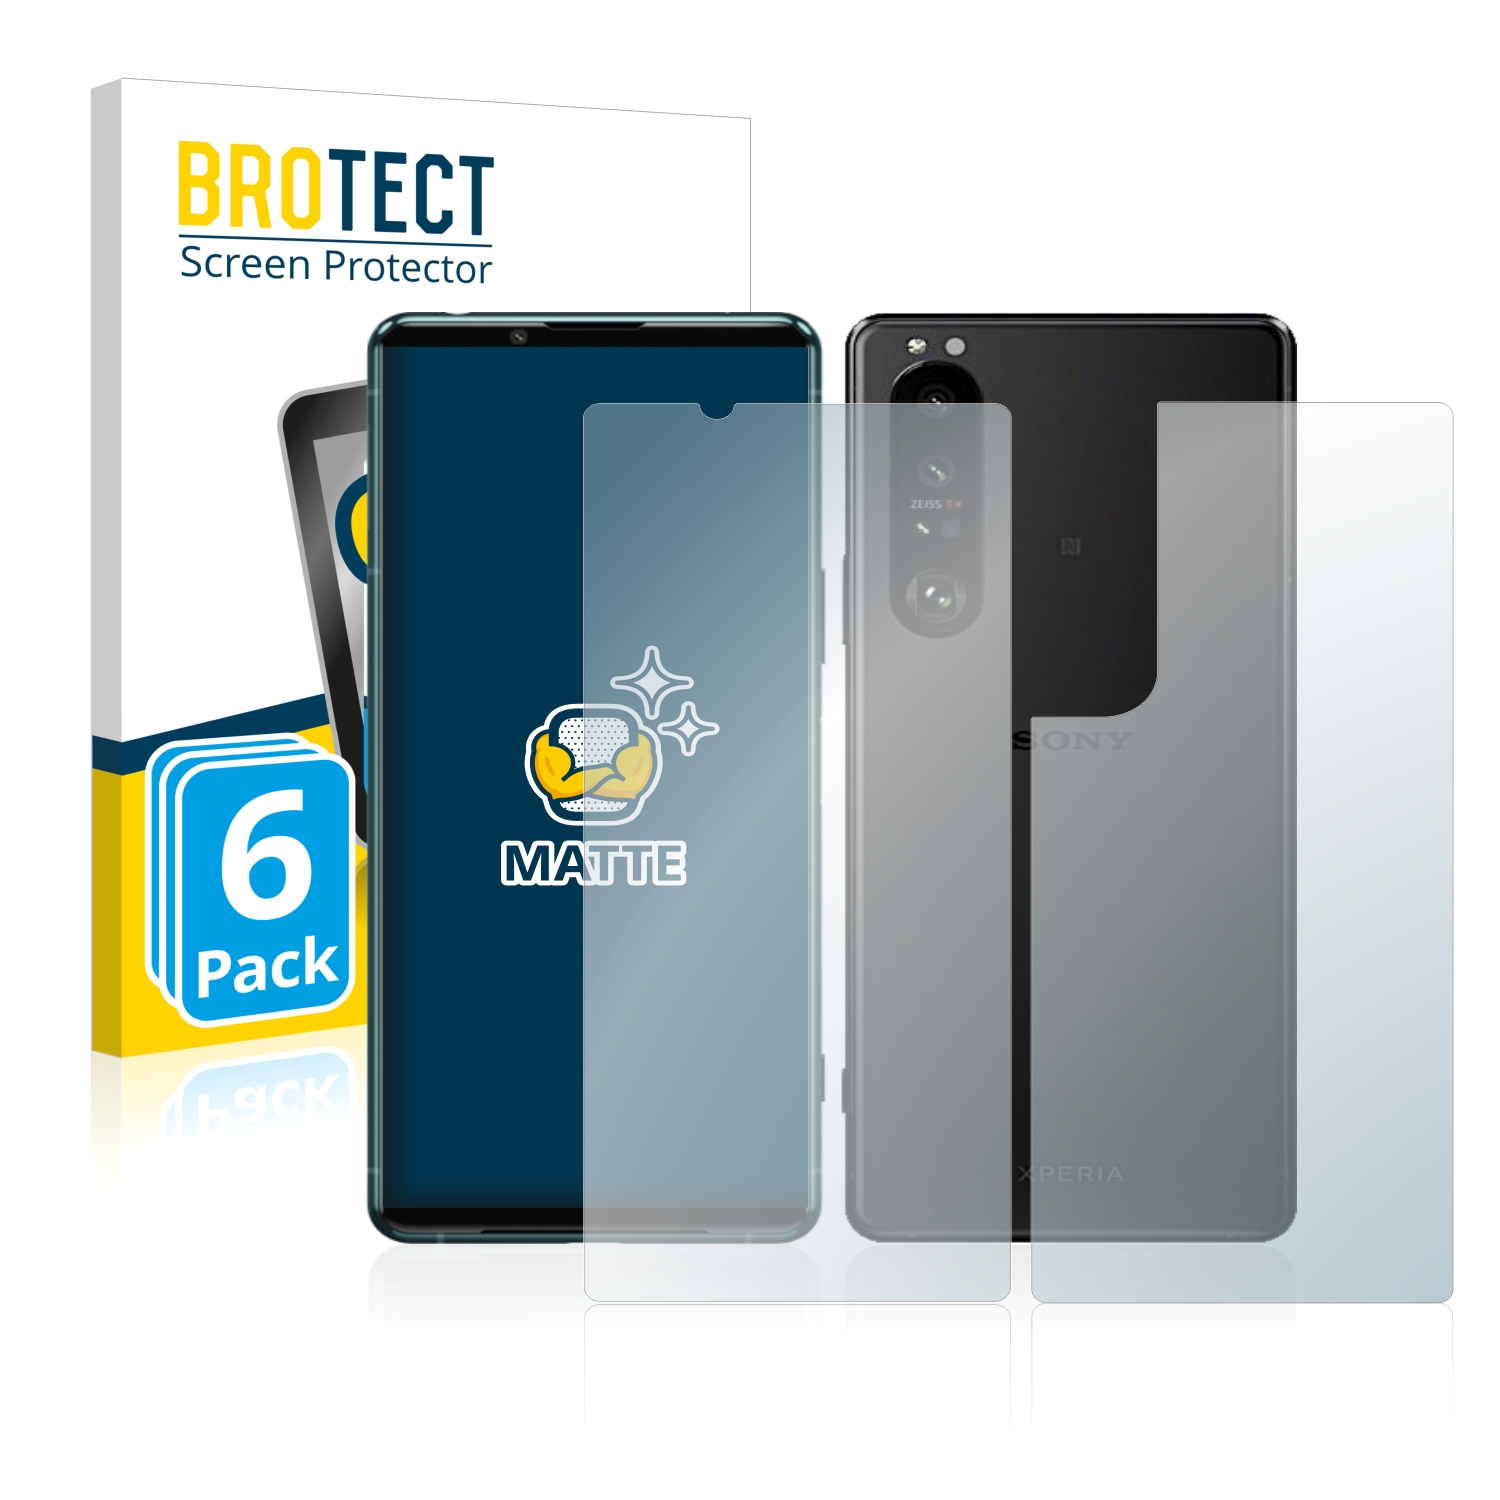 BROTECT 2x BROTECT Protection Ecran pour Sony Xperia SP M35h C5302 Clair Film Protection 